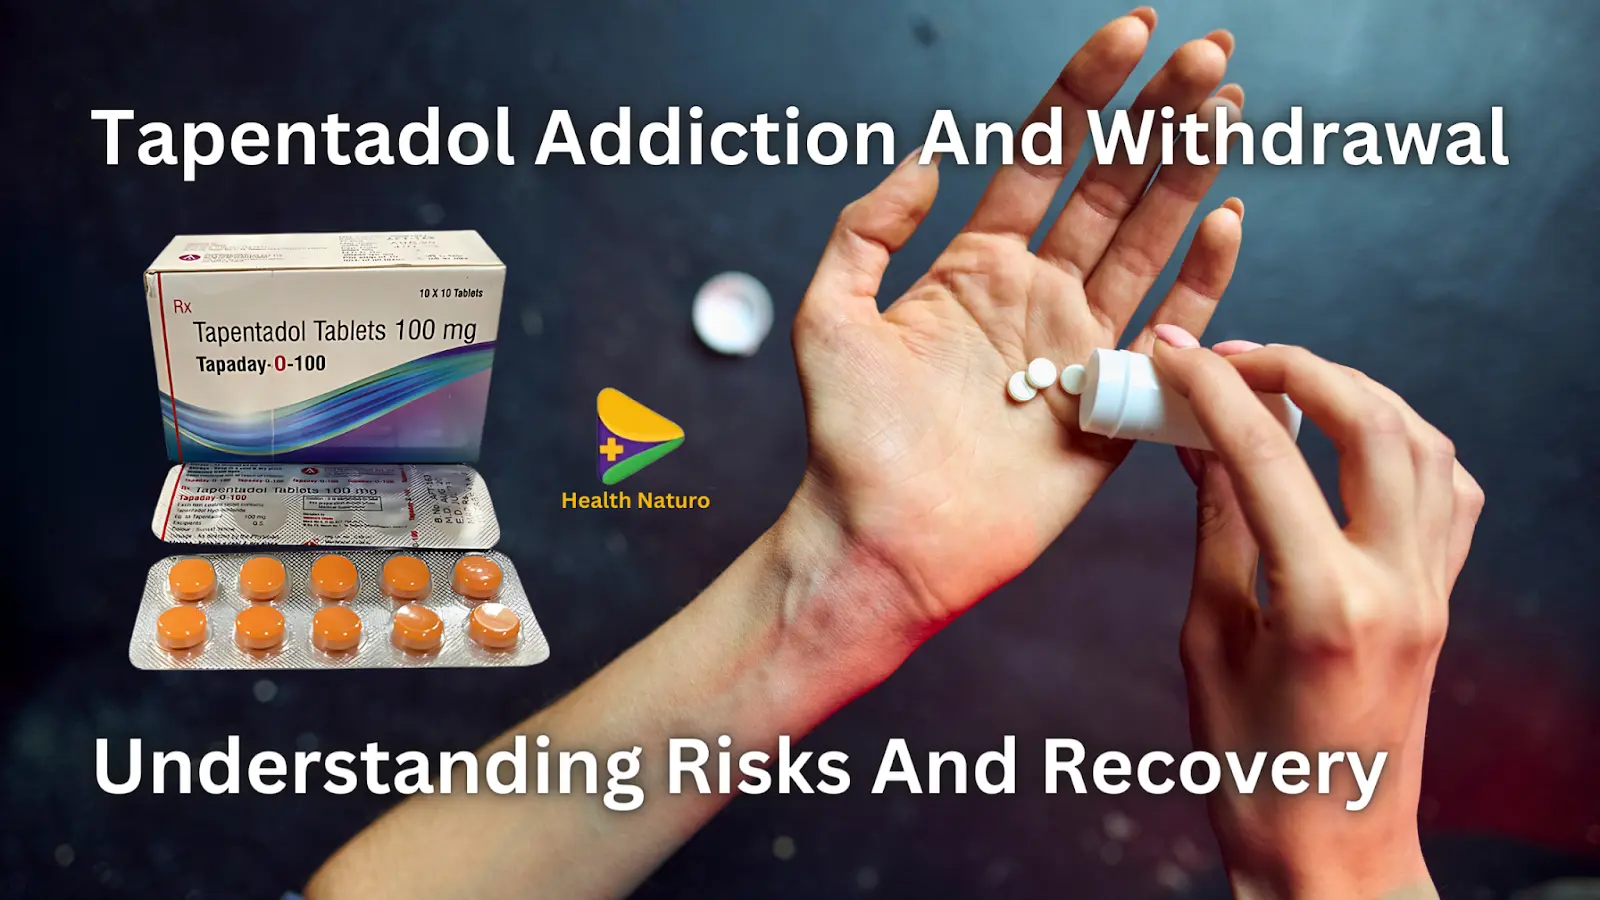 Tapentadol Addiction And Withdrawal: Understanding Risks And Recovery